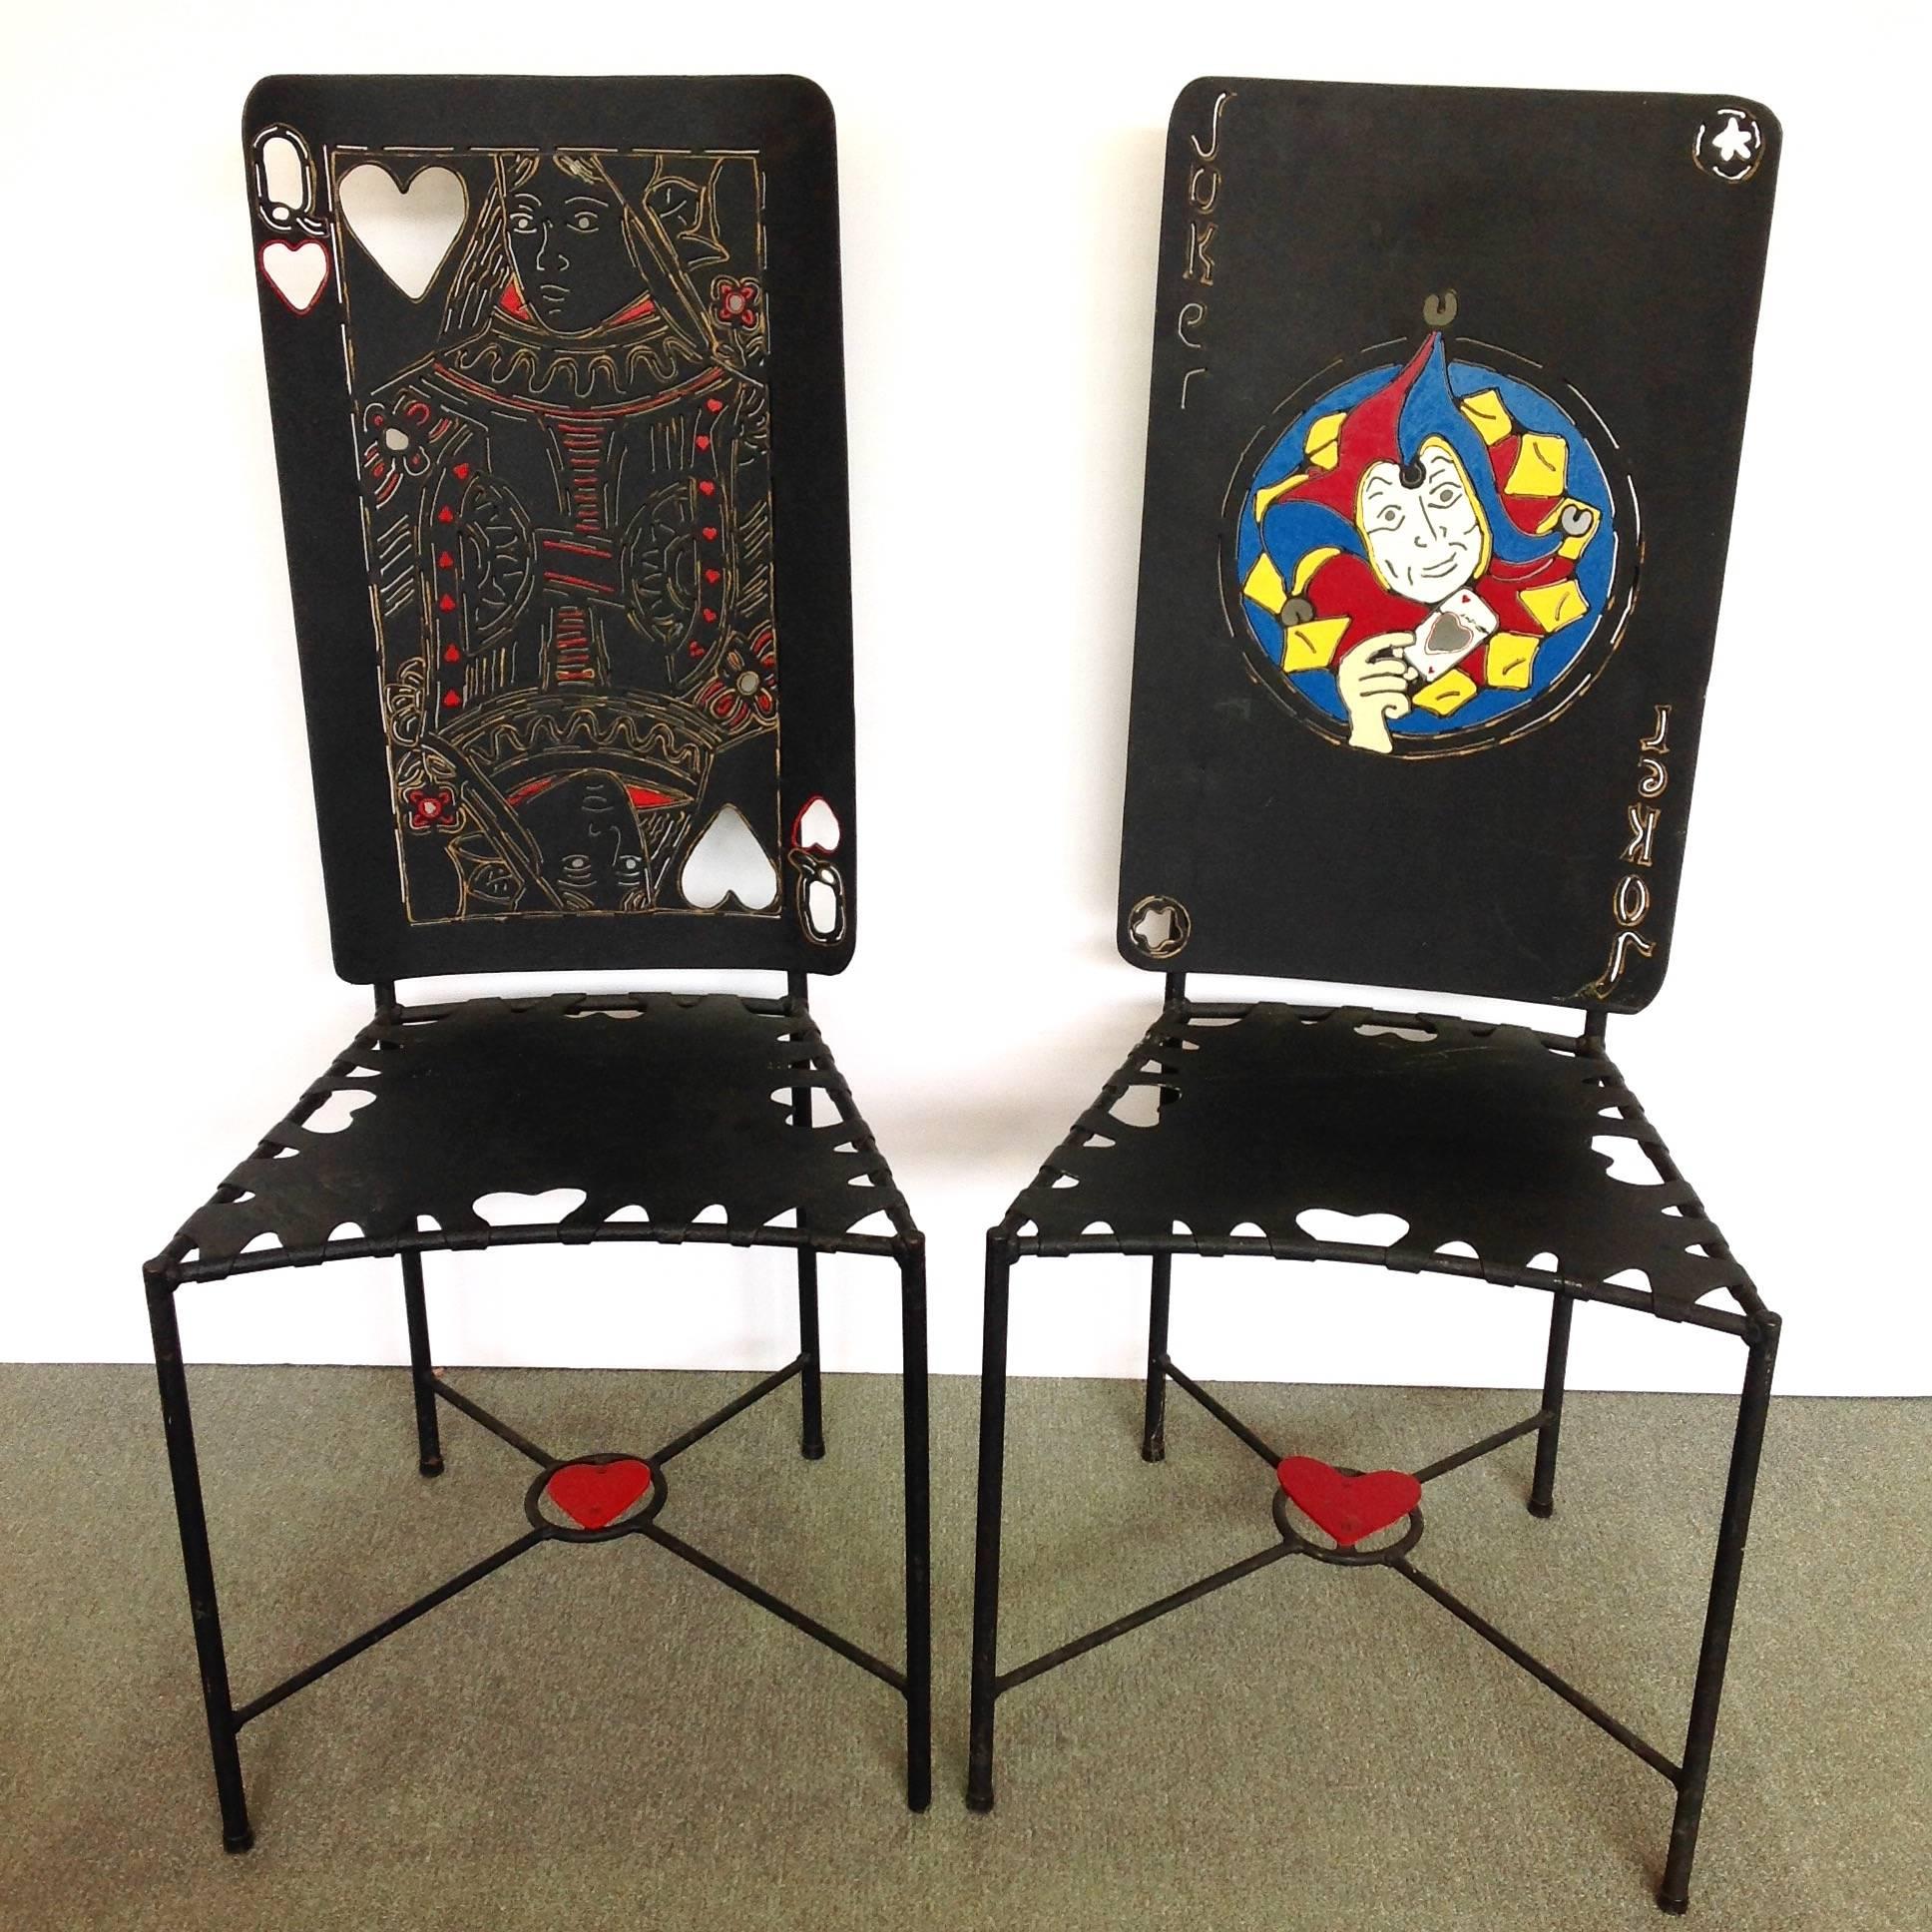 Handmade playing card iron chairs by Ries Niemi, depicting the Queen of Hearts and Joker. The design is both painted and pierced. Niemi worked in Bellingham, Washington in the 20th century.